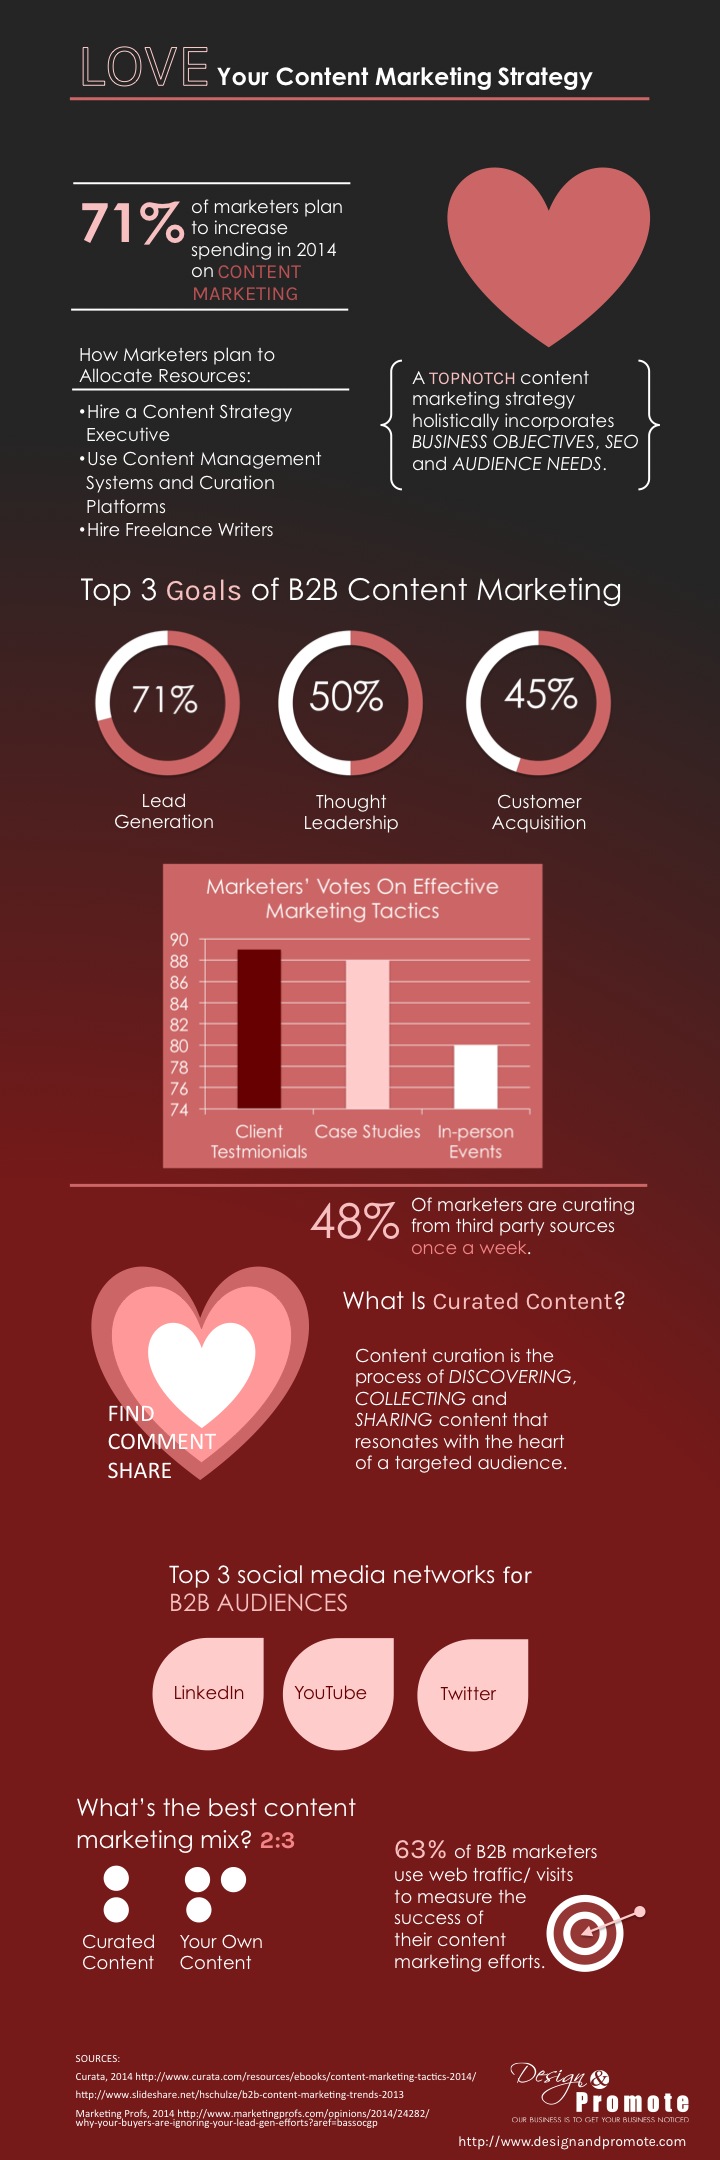 content marketing infographic 